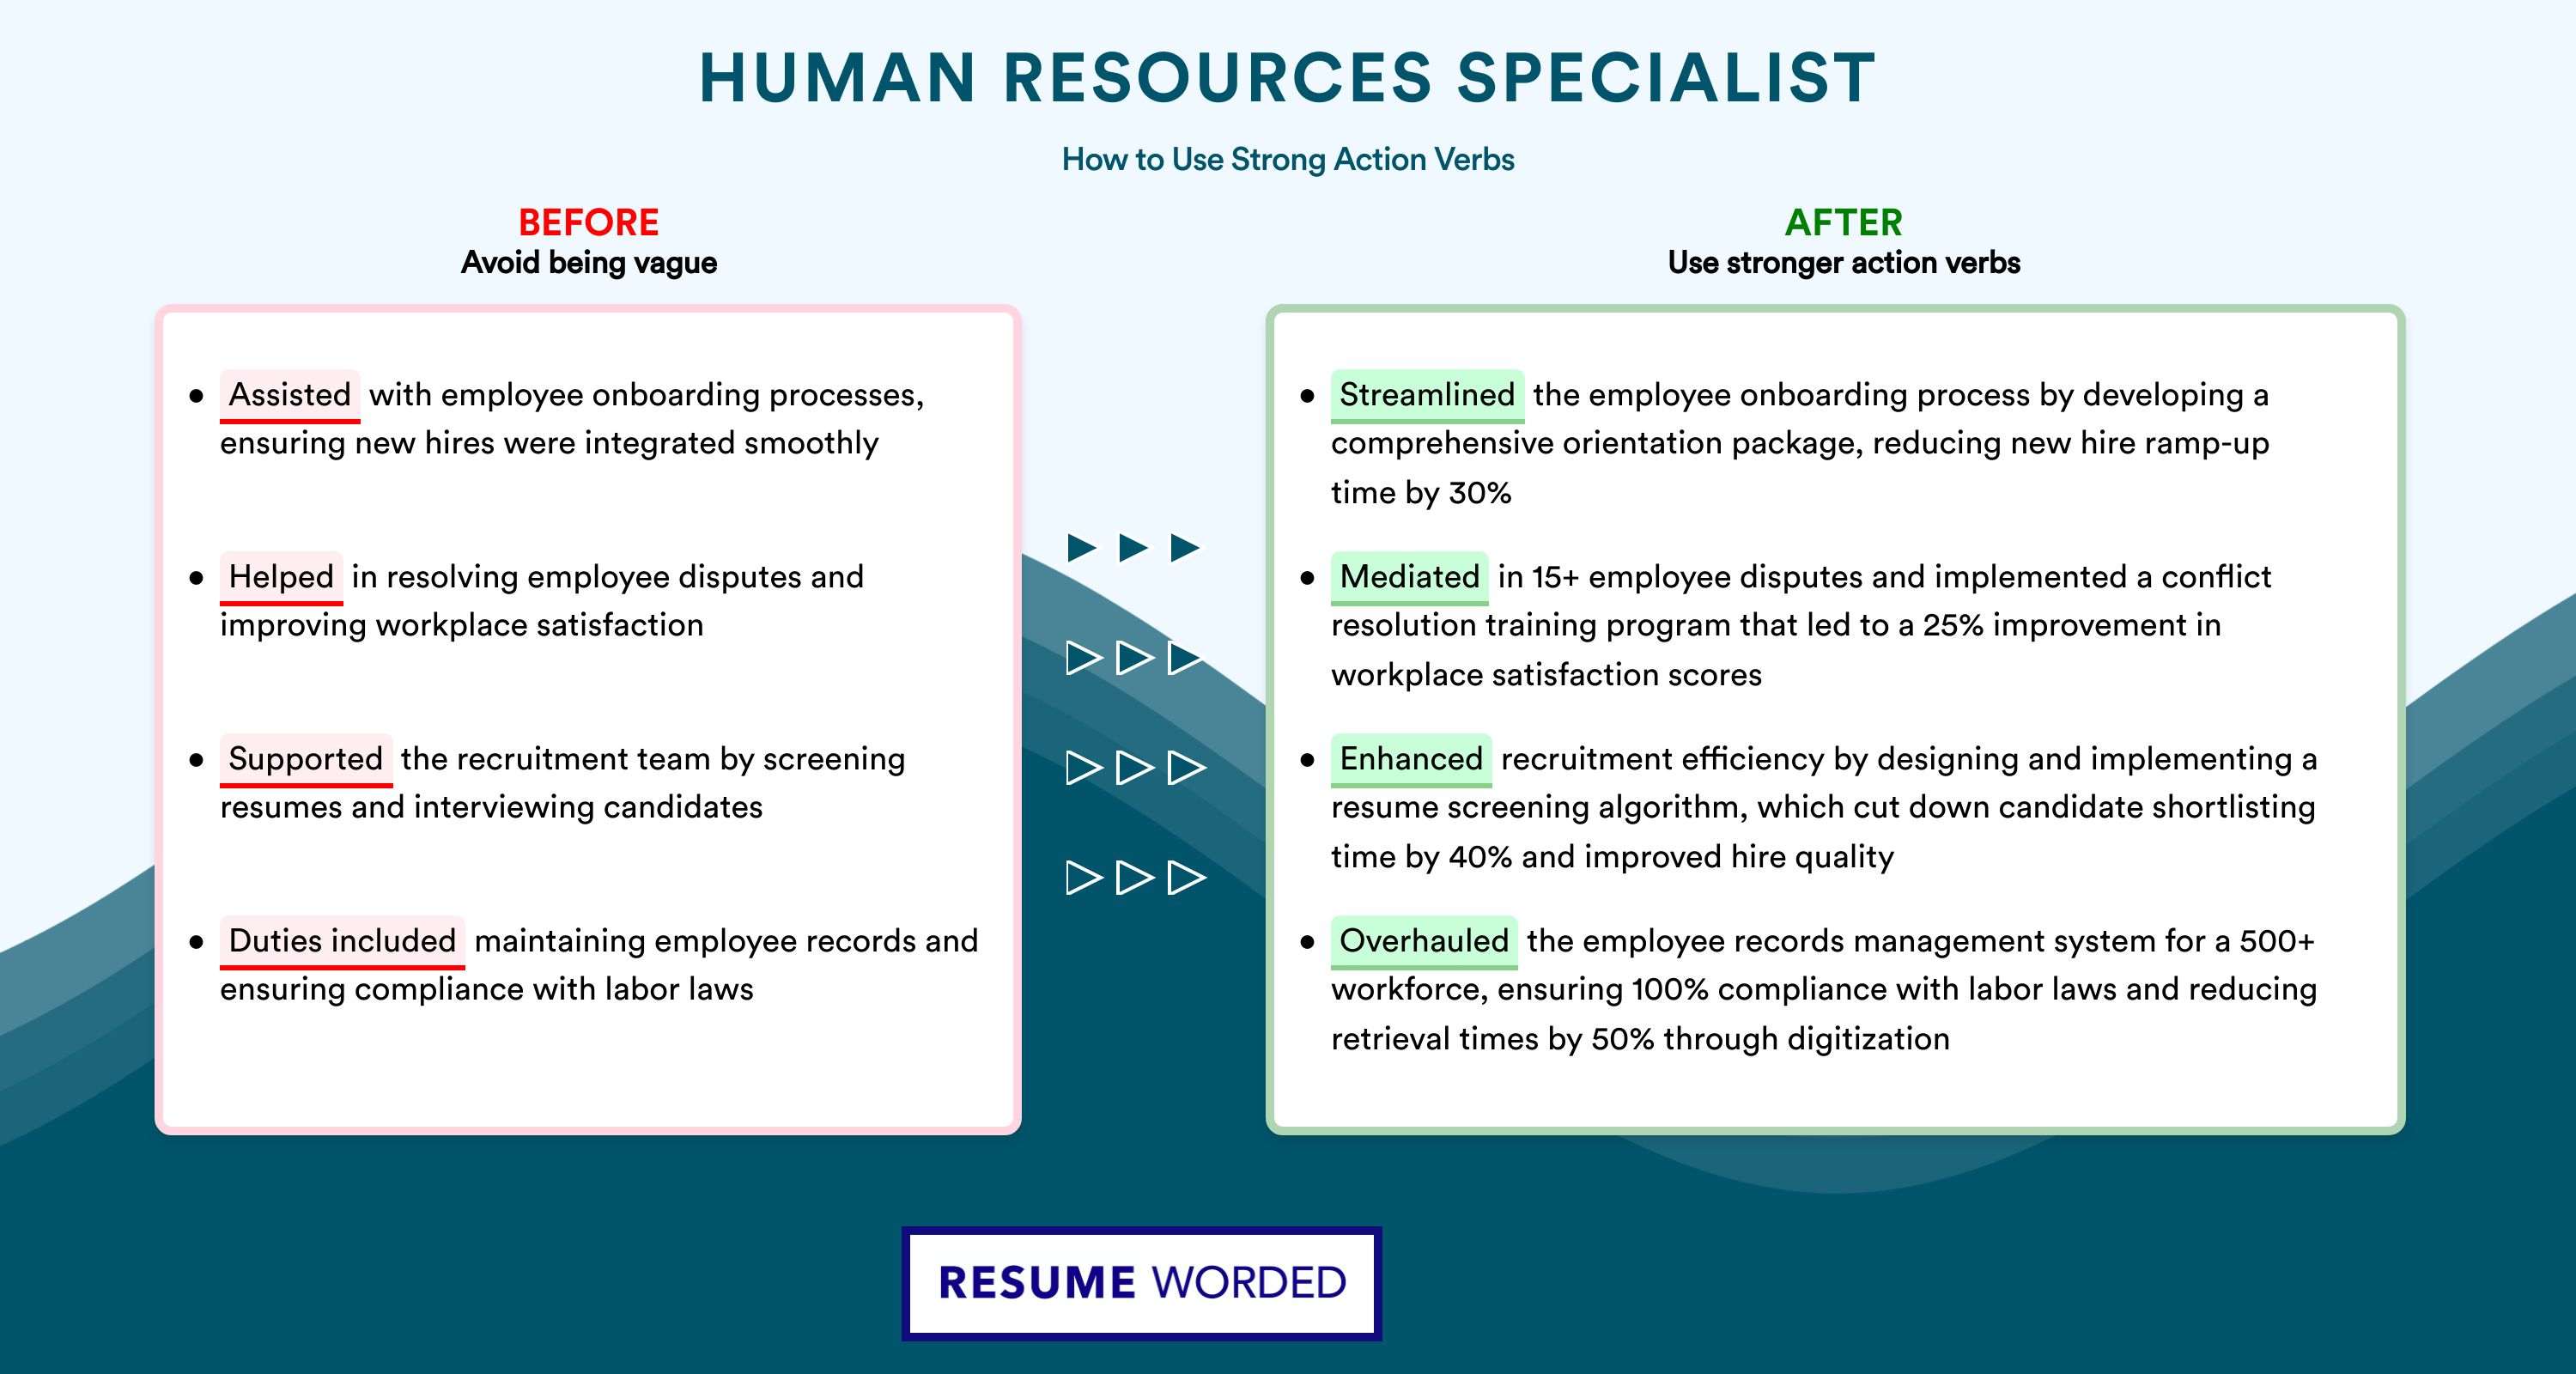 Action Verbs for Human Resources Specialist